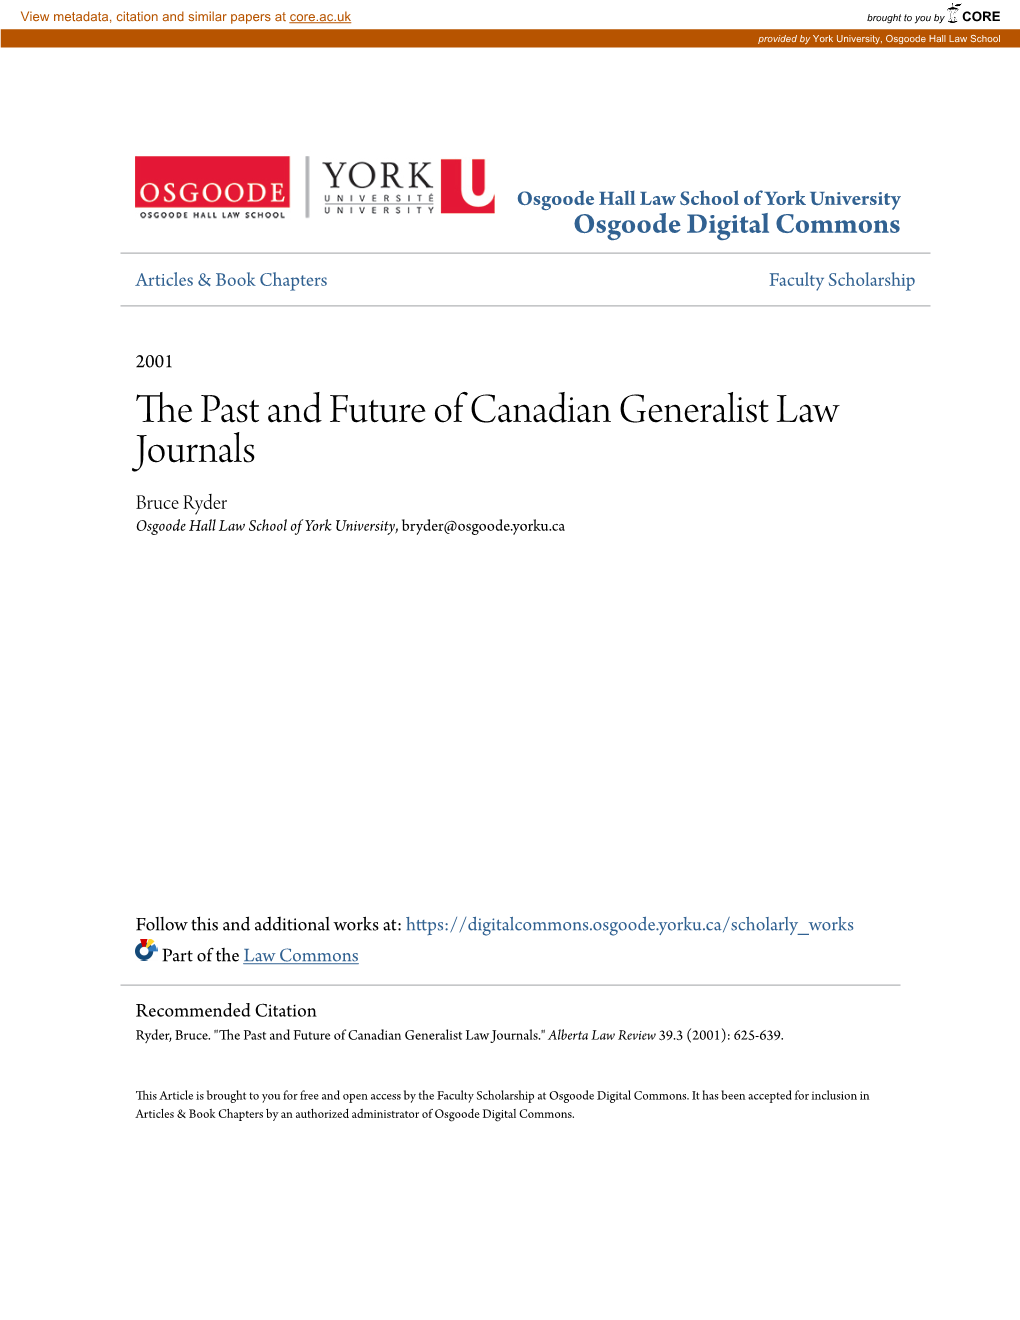 The Past and Future of Canadian Generalist Law Journals 625